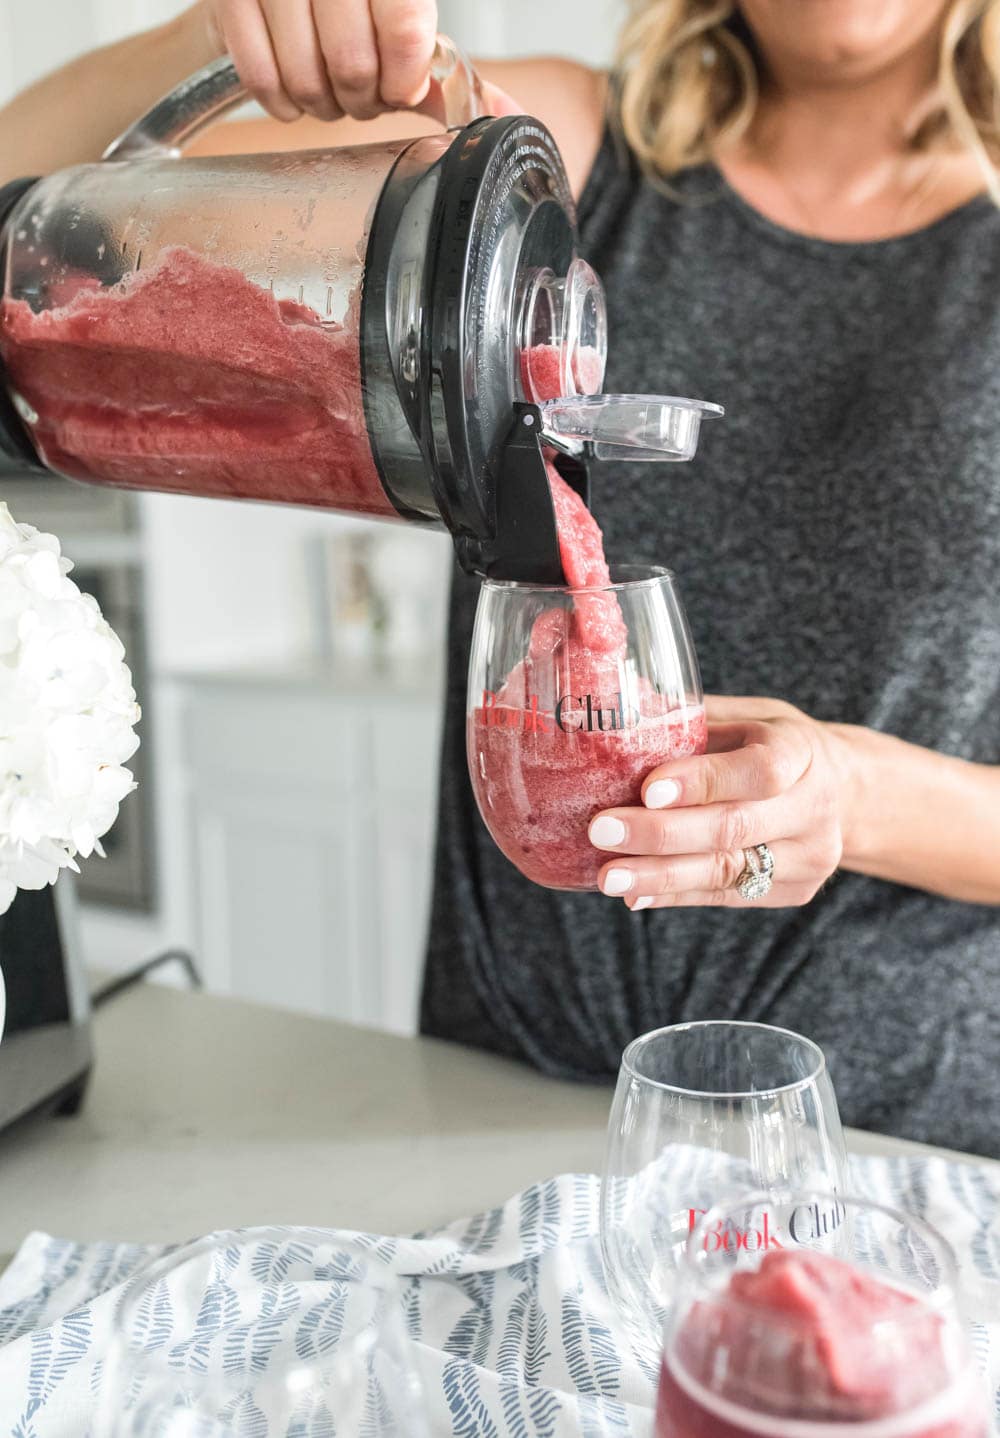 A delicious Spicy Wine Frosé Cocktail Recipe to celebrate a girls night in to watch Book Club! #ad #Bookclub